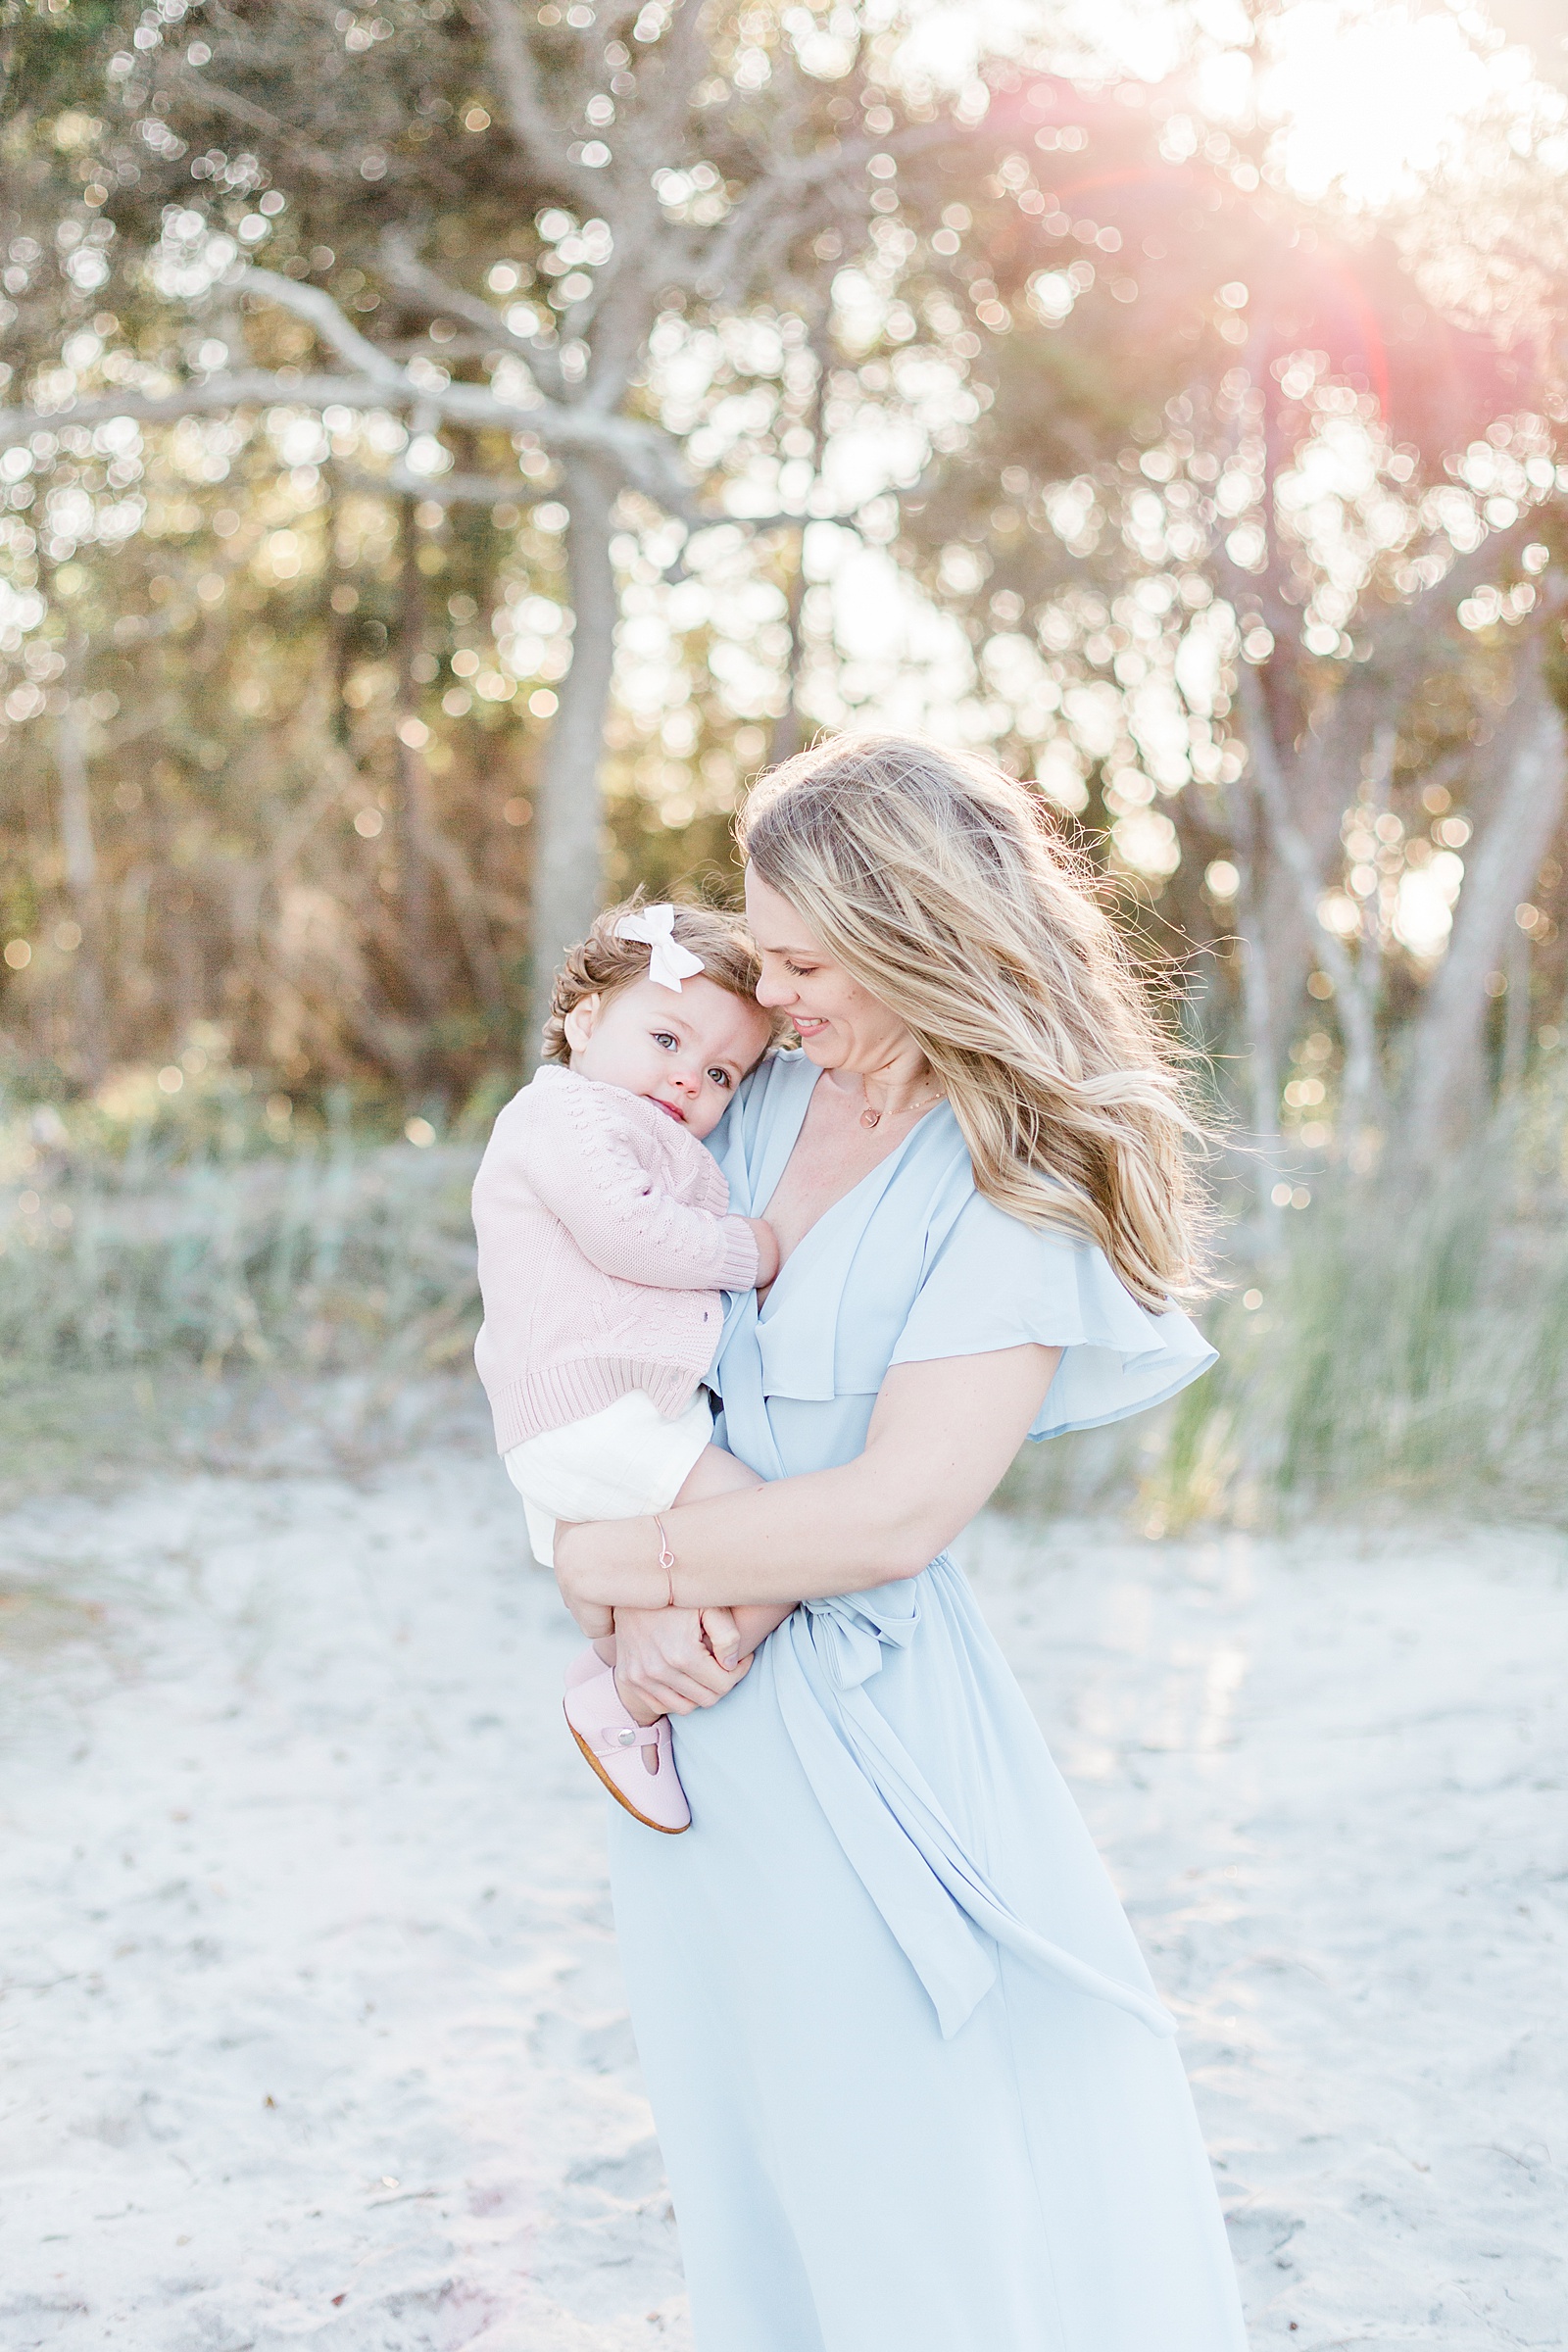 Mother and daughter at Folly Beach | Caitlyn Motycka Photography